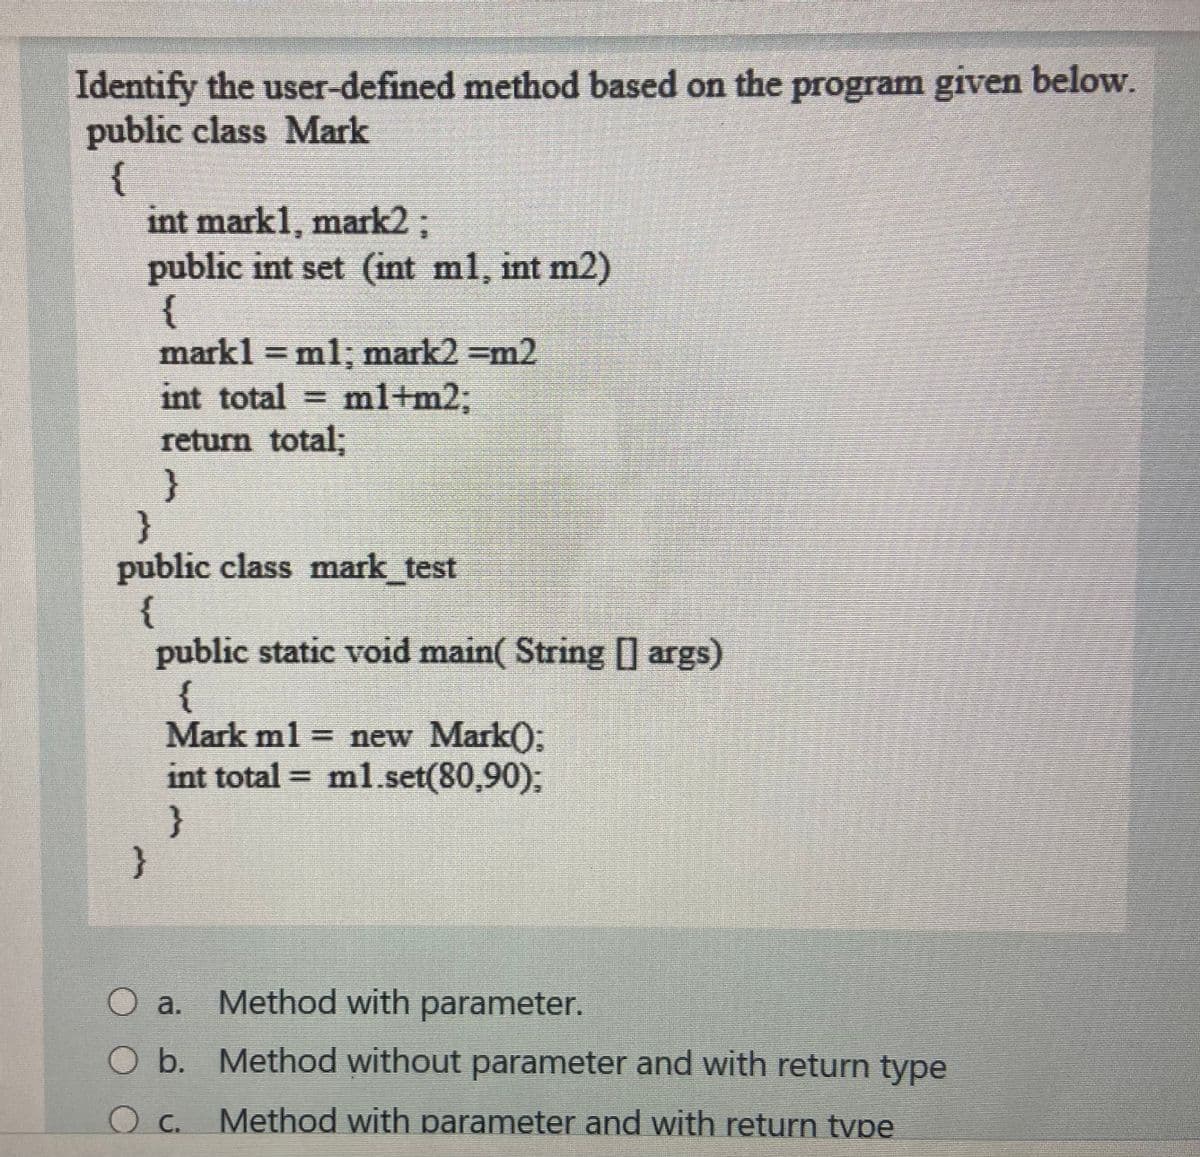 Identify the user-defined method based on the program given below.
public class Mark
{
int mark1, mark2;
public int set (int ml, int m2)
{
mark1 = ml; mark2 =m2
int total ml+m23B
return tota%;
}
}
public class mark test
{
public static void main( String ] args)
{
Mark ml = new Mark():
int total = ml.set(80,90);
}
}
O a. Method with parameter.
O b. Method without parameter and with return type
Method with parameter and with return tvpe
